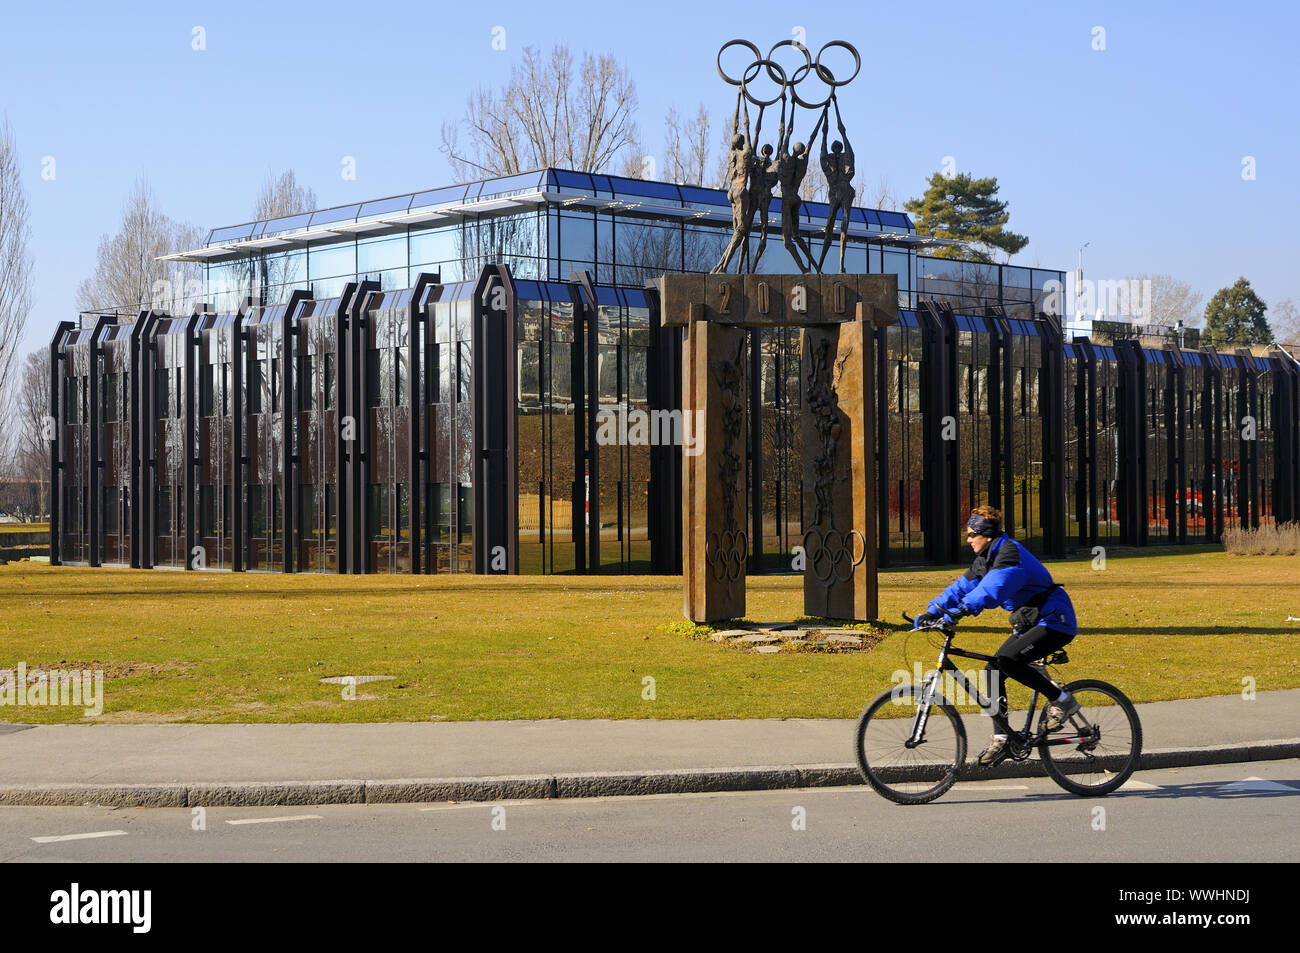 Seat of the International Olympic Committee (IOC) Stock Photo